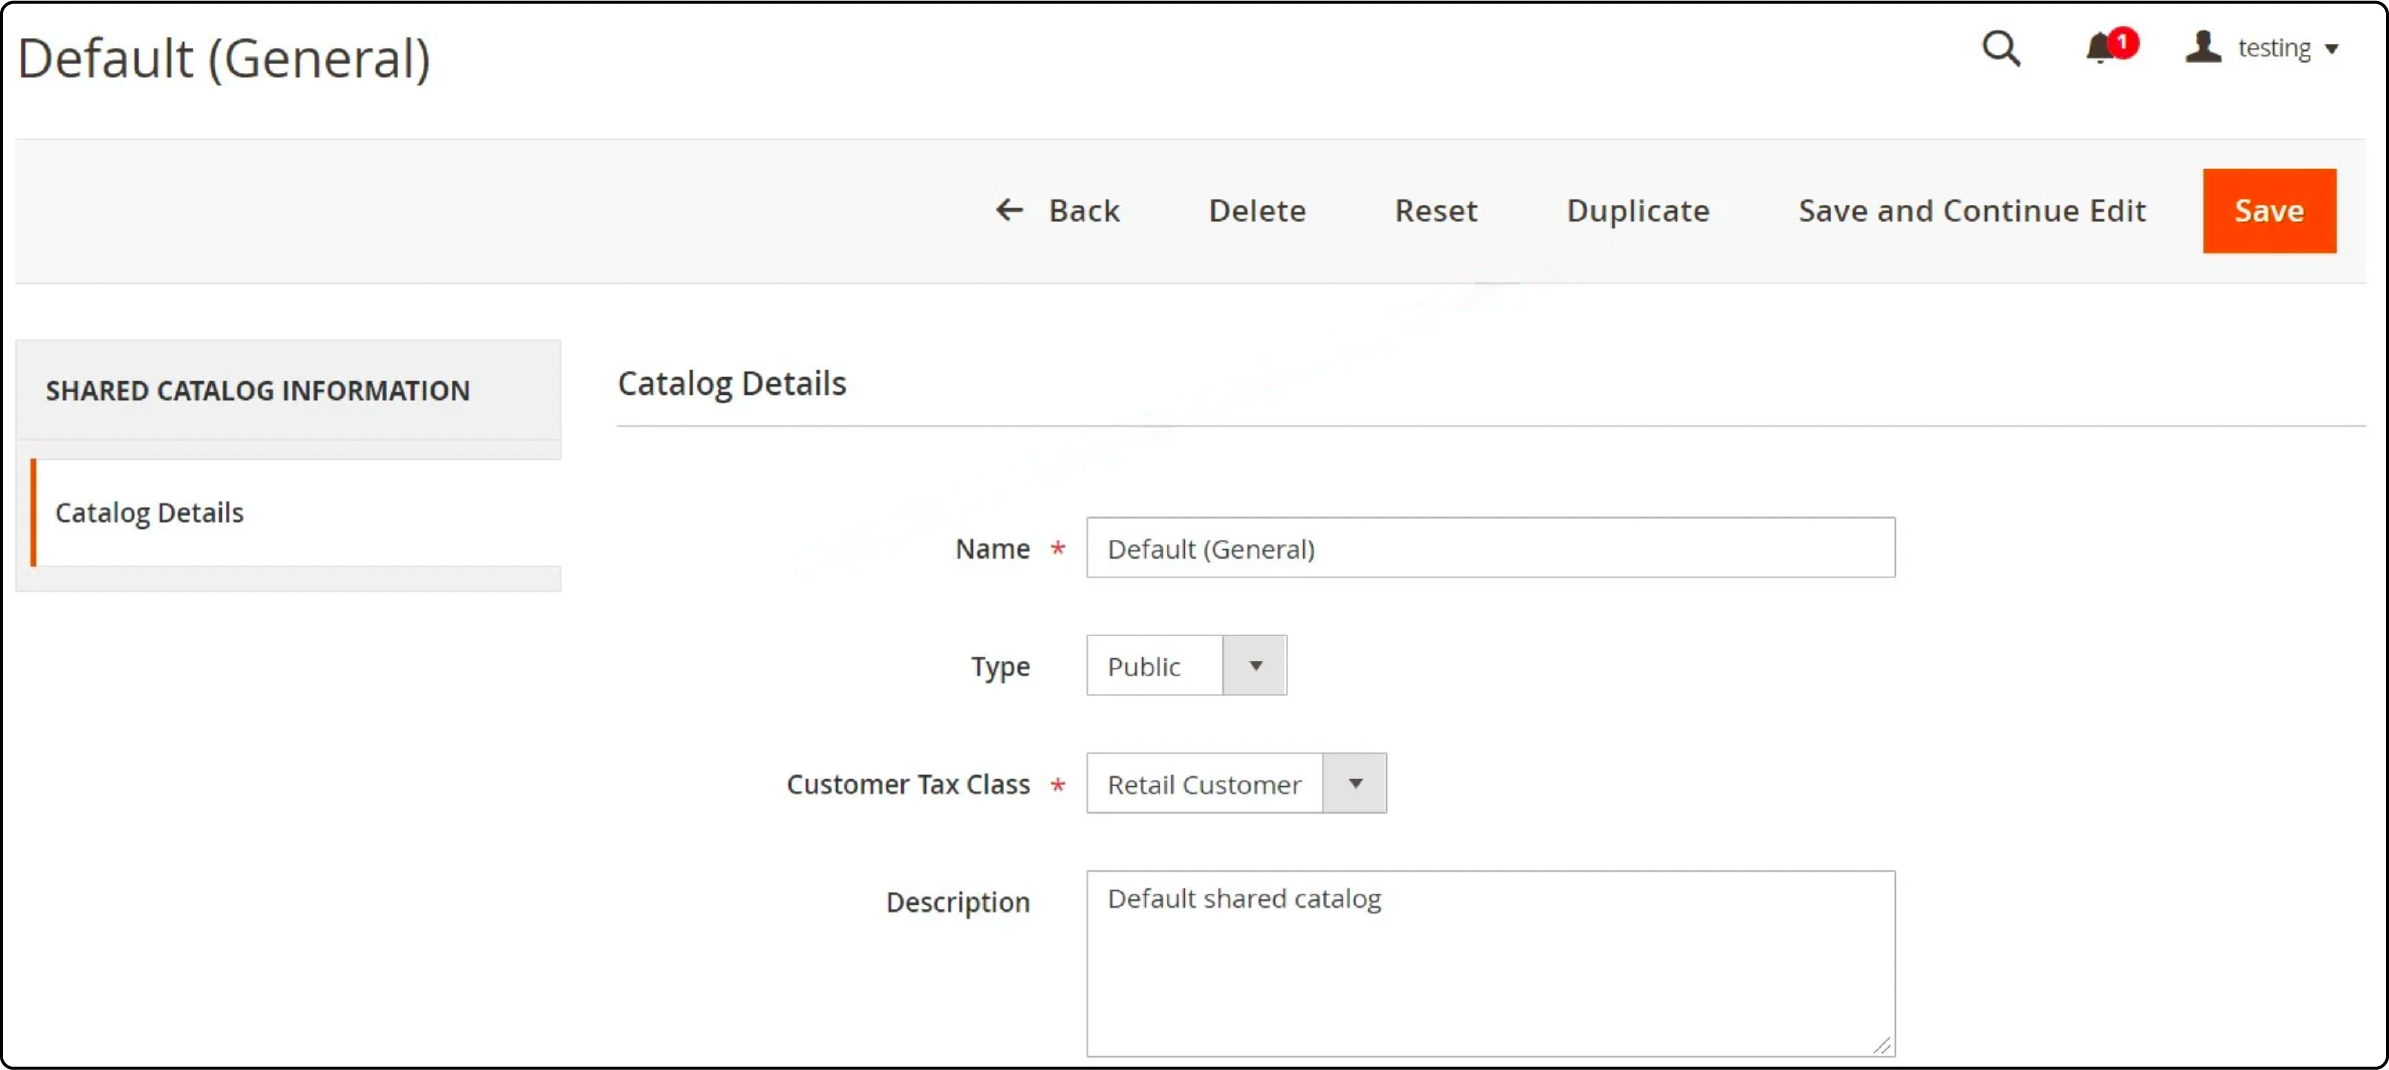  Process of duplicating an existing shared catalog in Magento 2 for efficiency